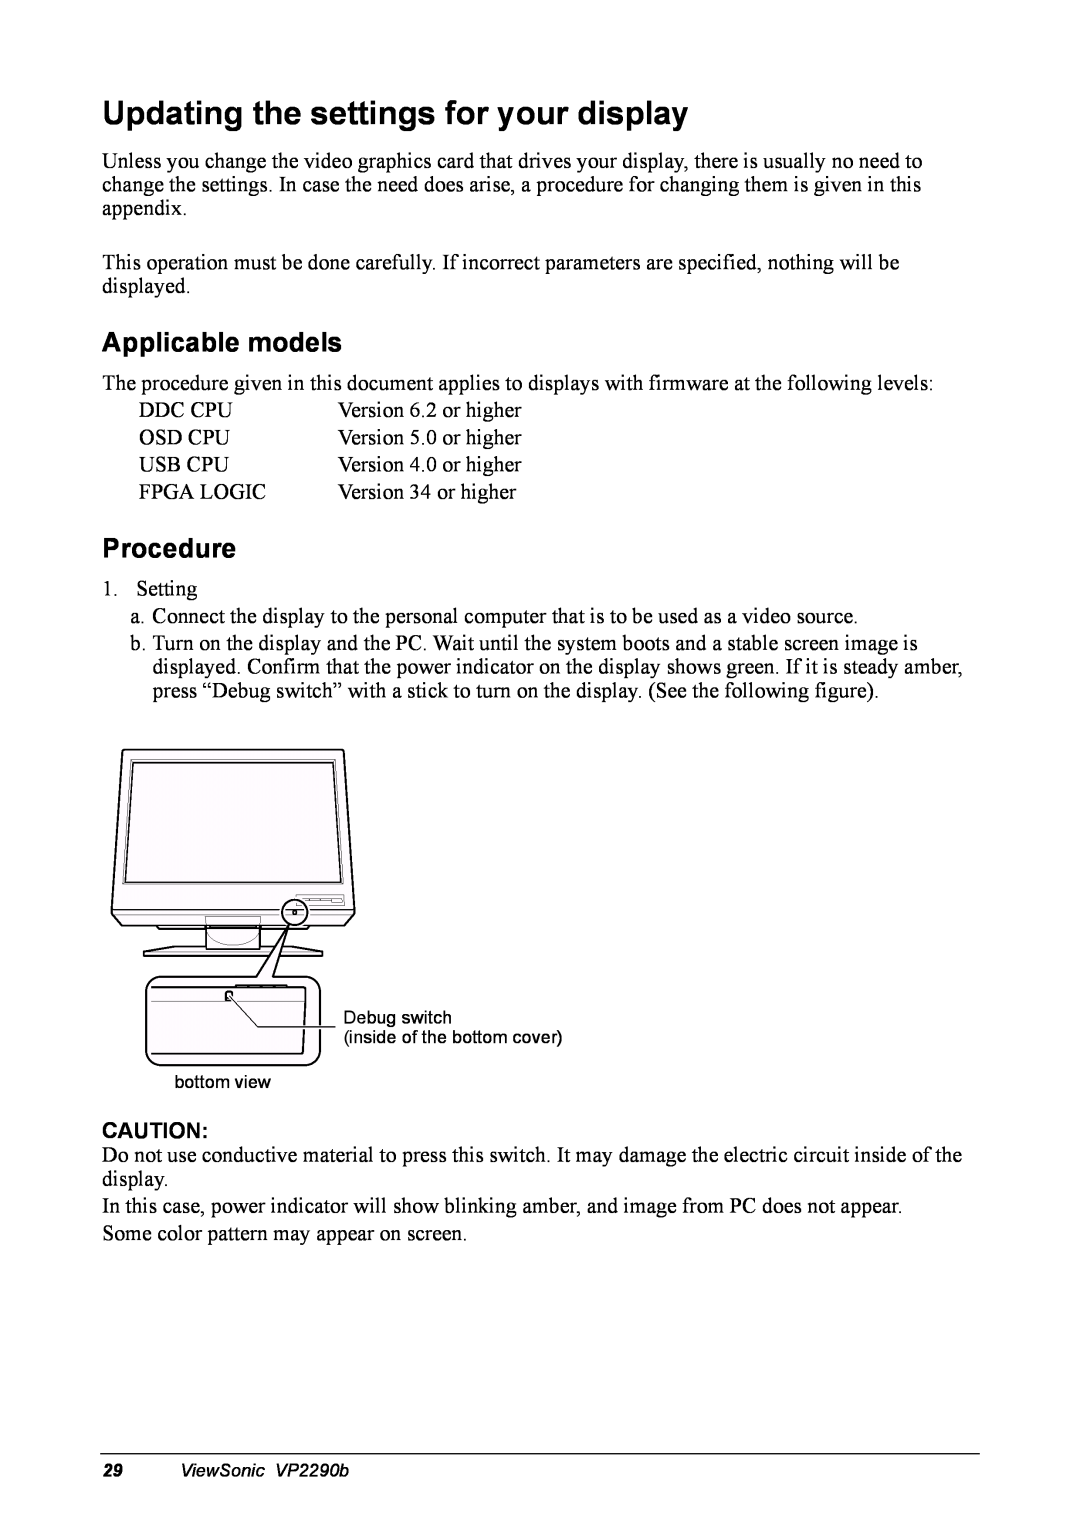 ViewSonic VP2290B manual Updating the settings for your display, Applicable models, Procedure 